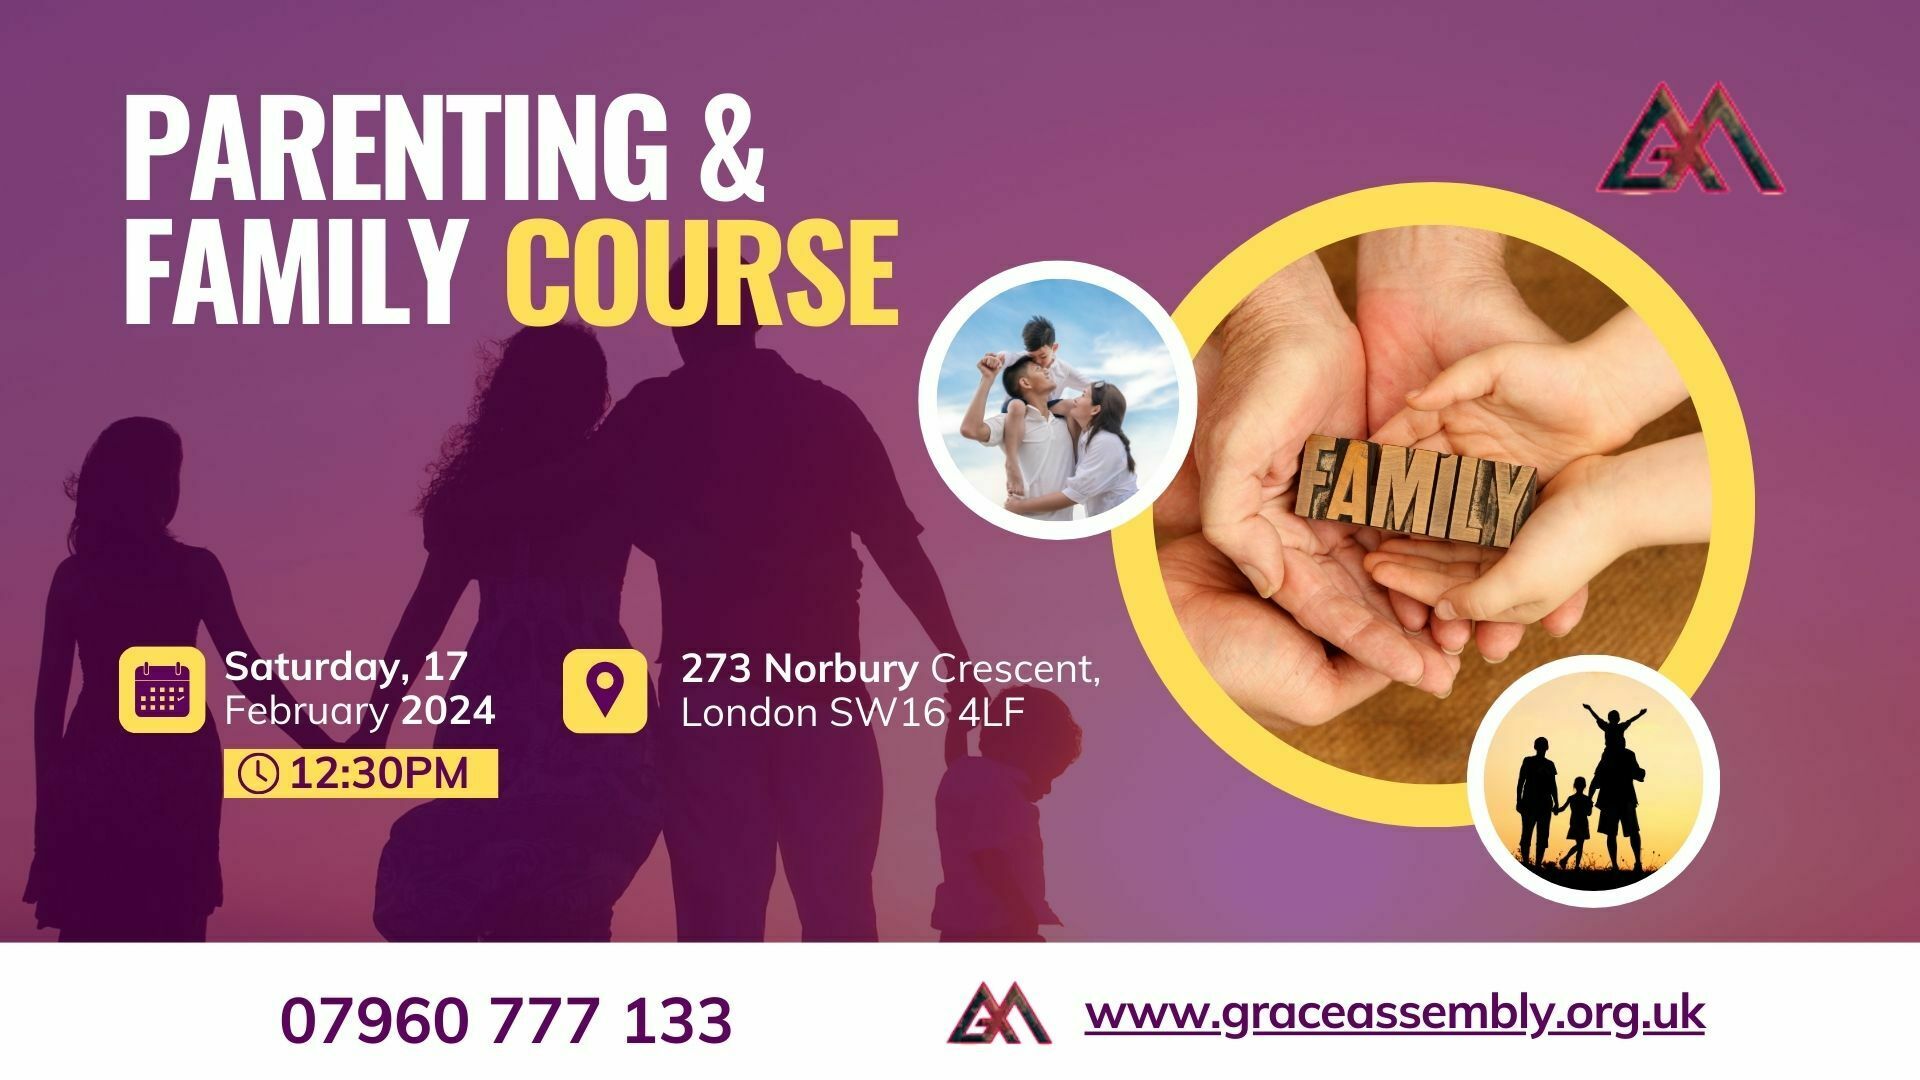 PARENTING AND FAMILY RELATIONSHIP COURSE, London, United Kingdom